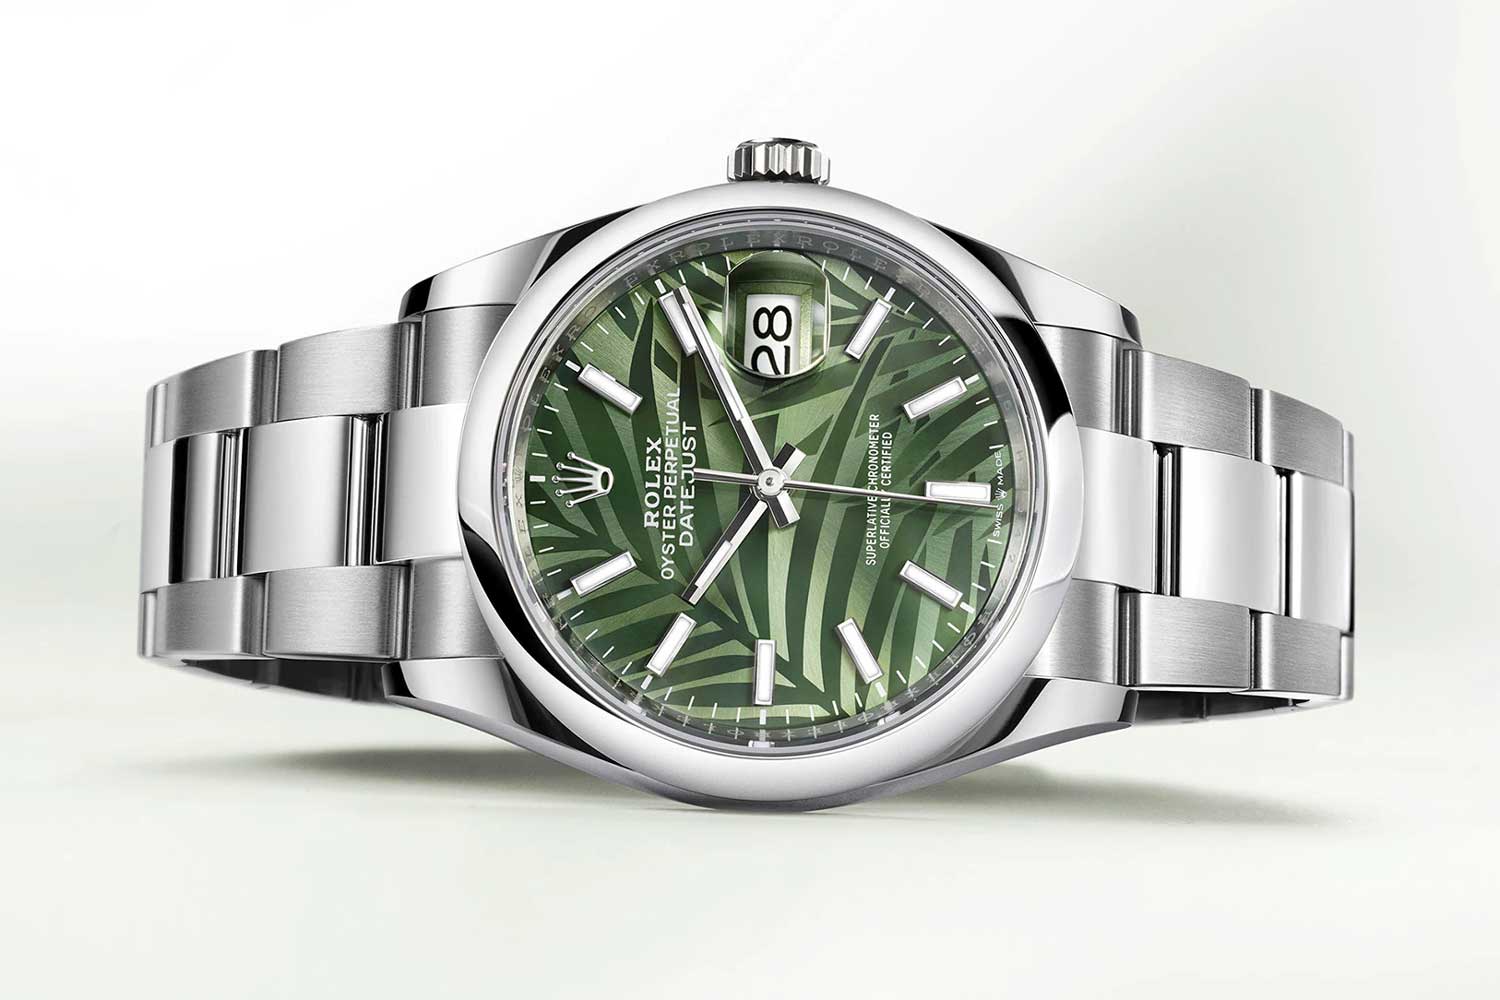 The Rolex Datejust 36 featuring new "Palm" and "Fluted" dial motifs